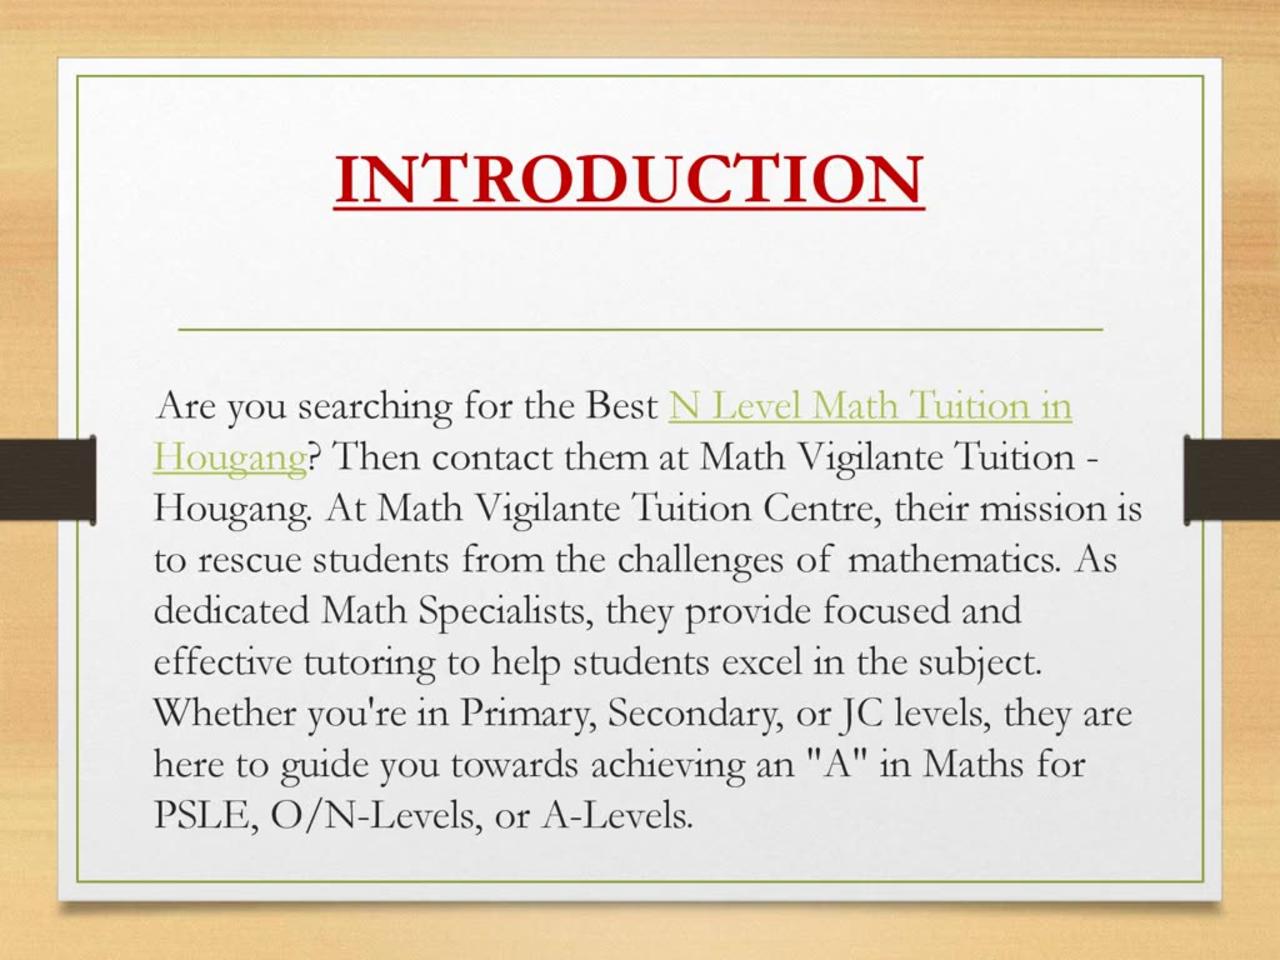 N Level Math Tuition in Hougang